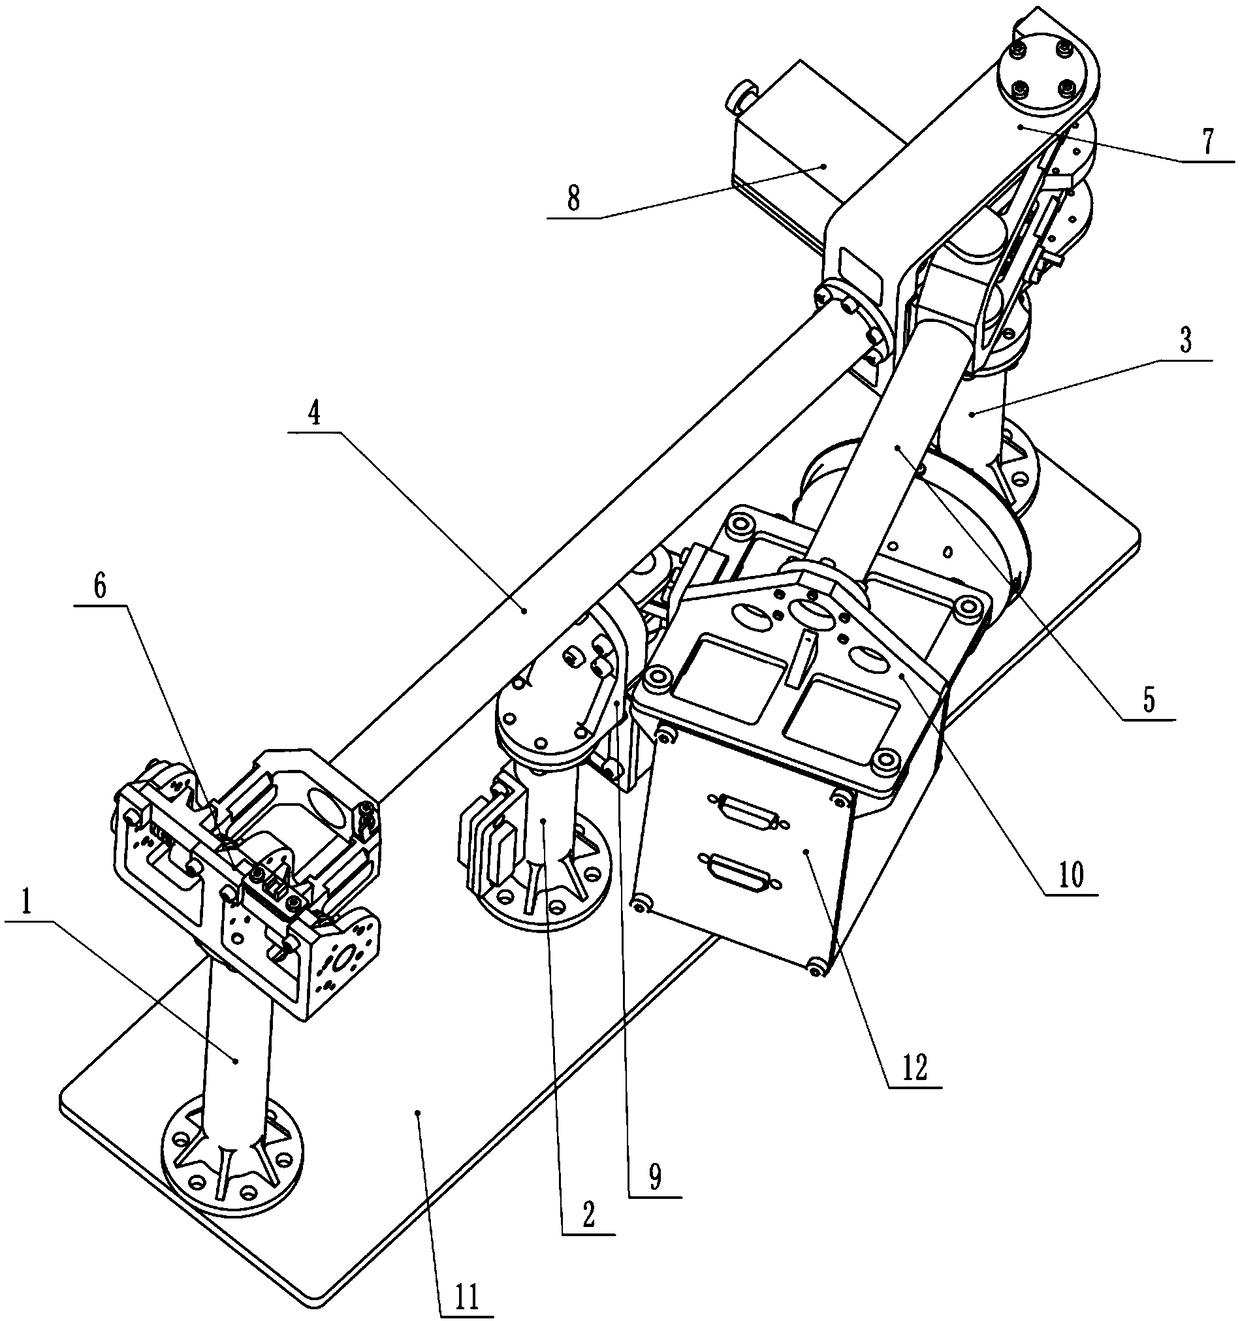 Automatically expandable autodyne support for outer space